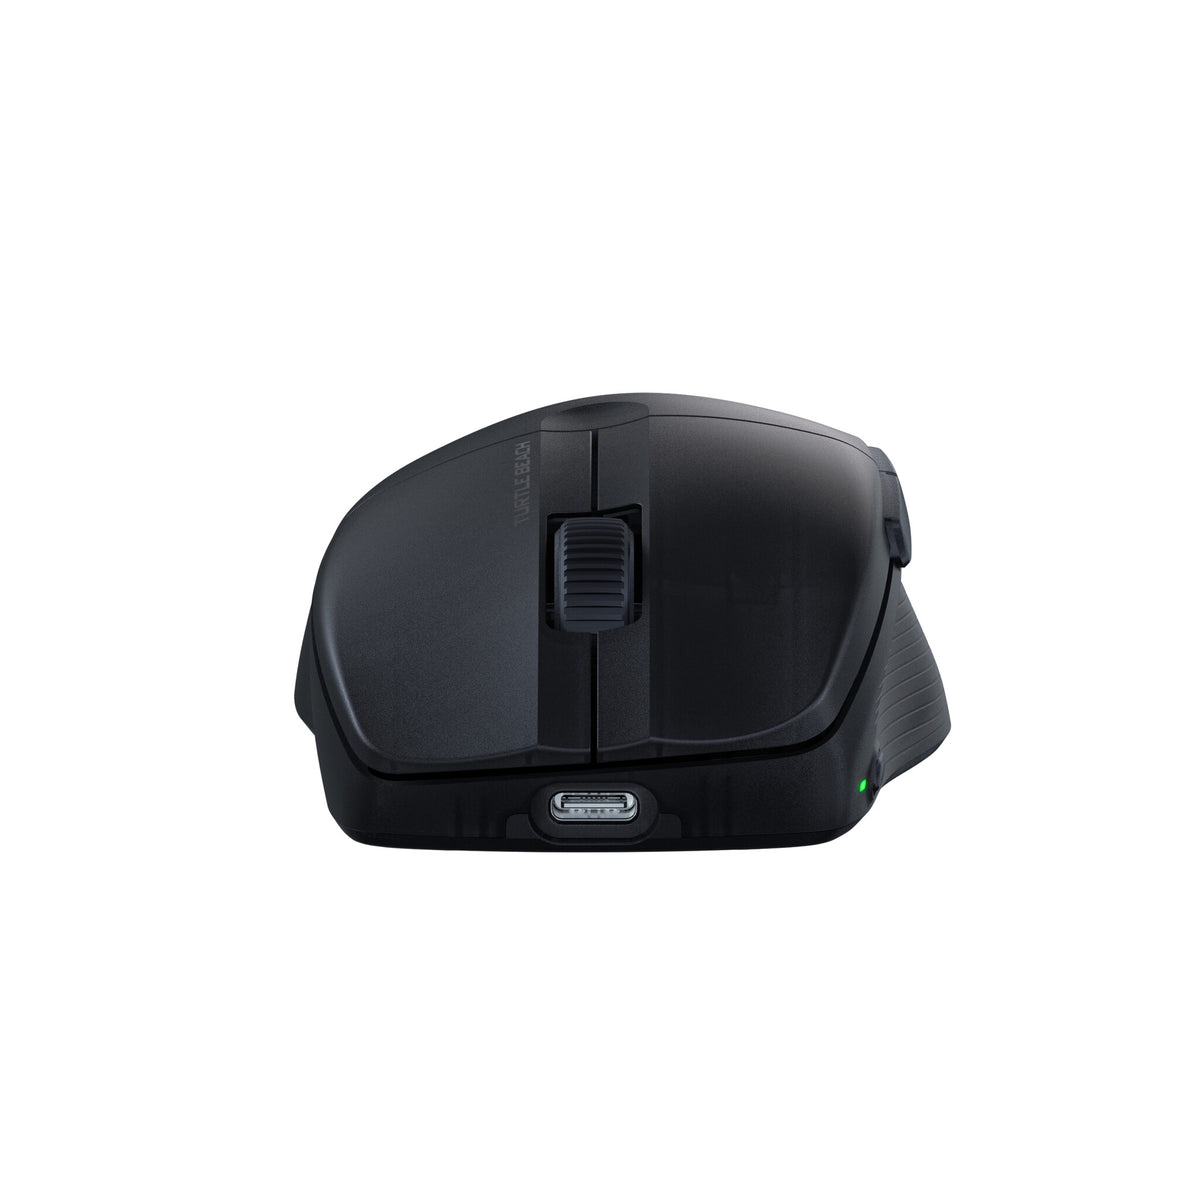 Turtle Beach Pure Air - Ultra-Light RGB Wireless Gaming Mouse in Black - 26,000 DPI